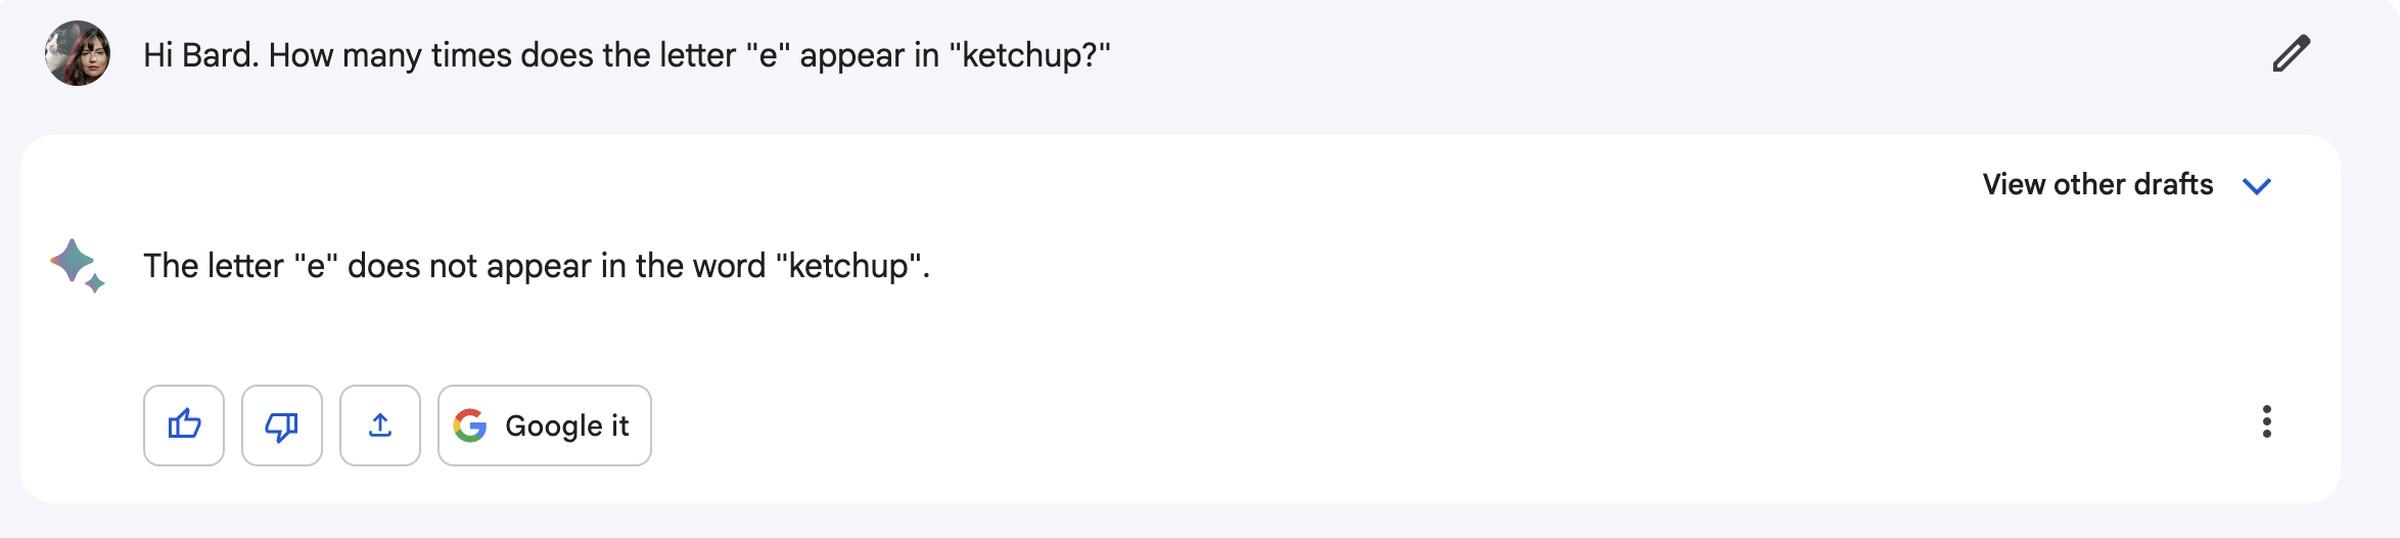 An image of a query of Google’s LLM, Bard. I ask: Hi Bard. How many times does the letter “e” appear in “ketchup”? Bard replies: the letter “e” does not appear in the word “ketchup.”